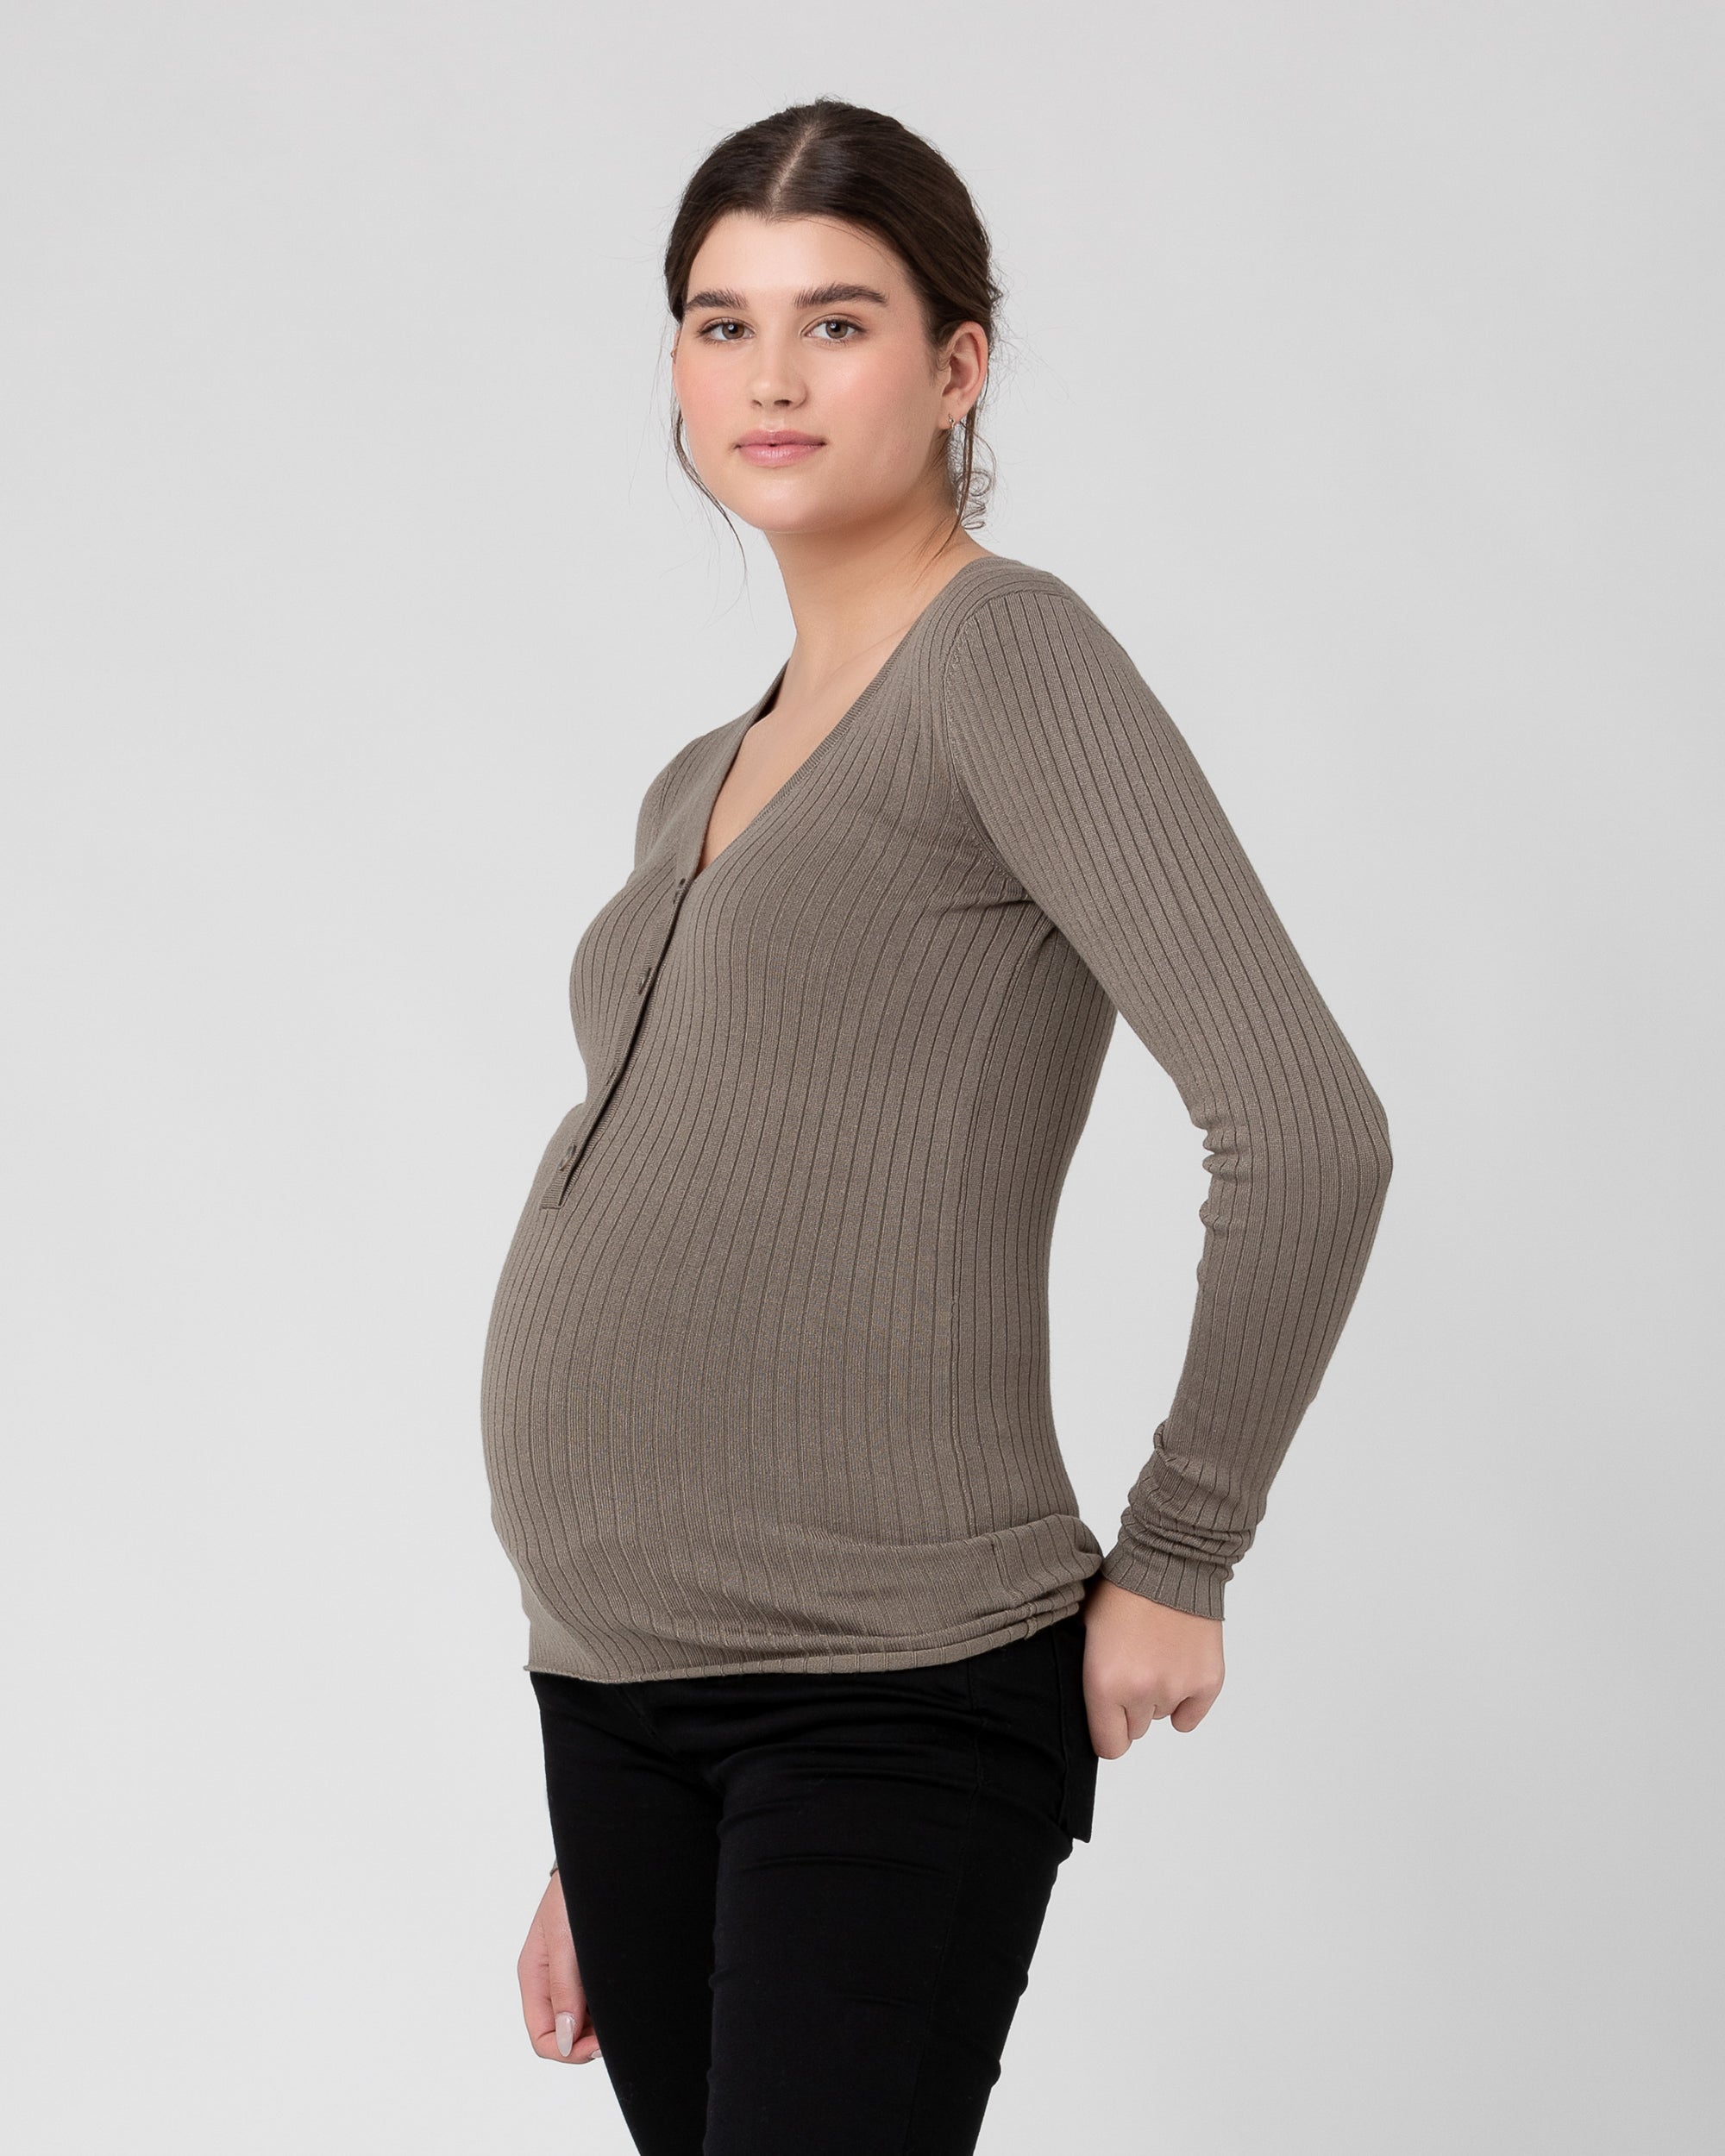 Oversized wool sweater with nursing access, Maternity top / Nursing top